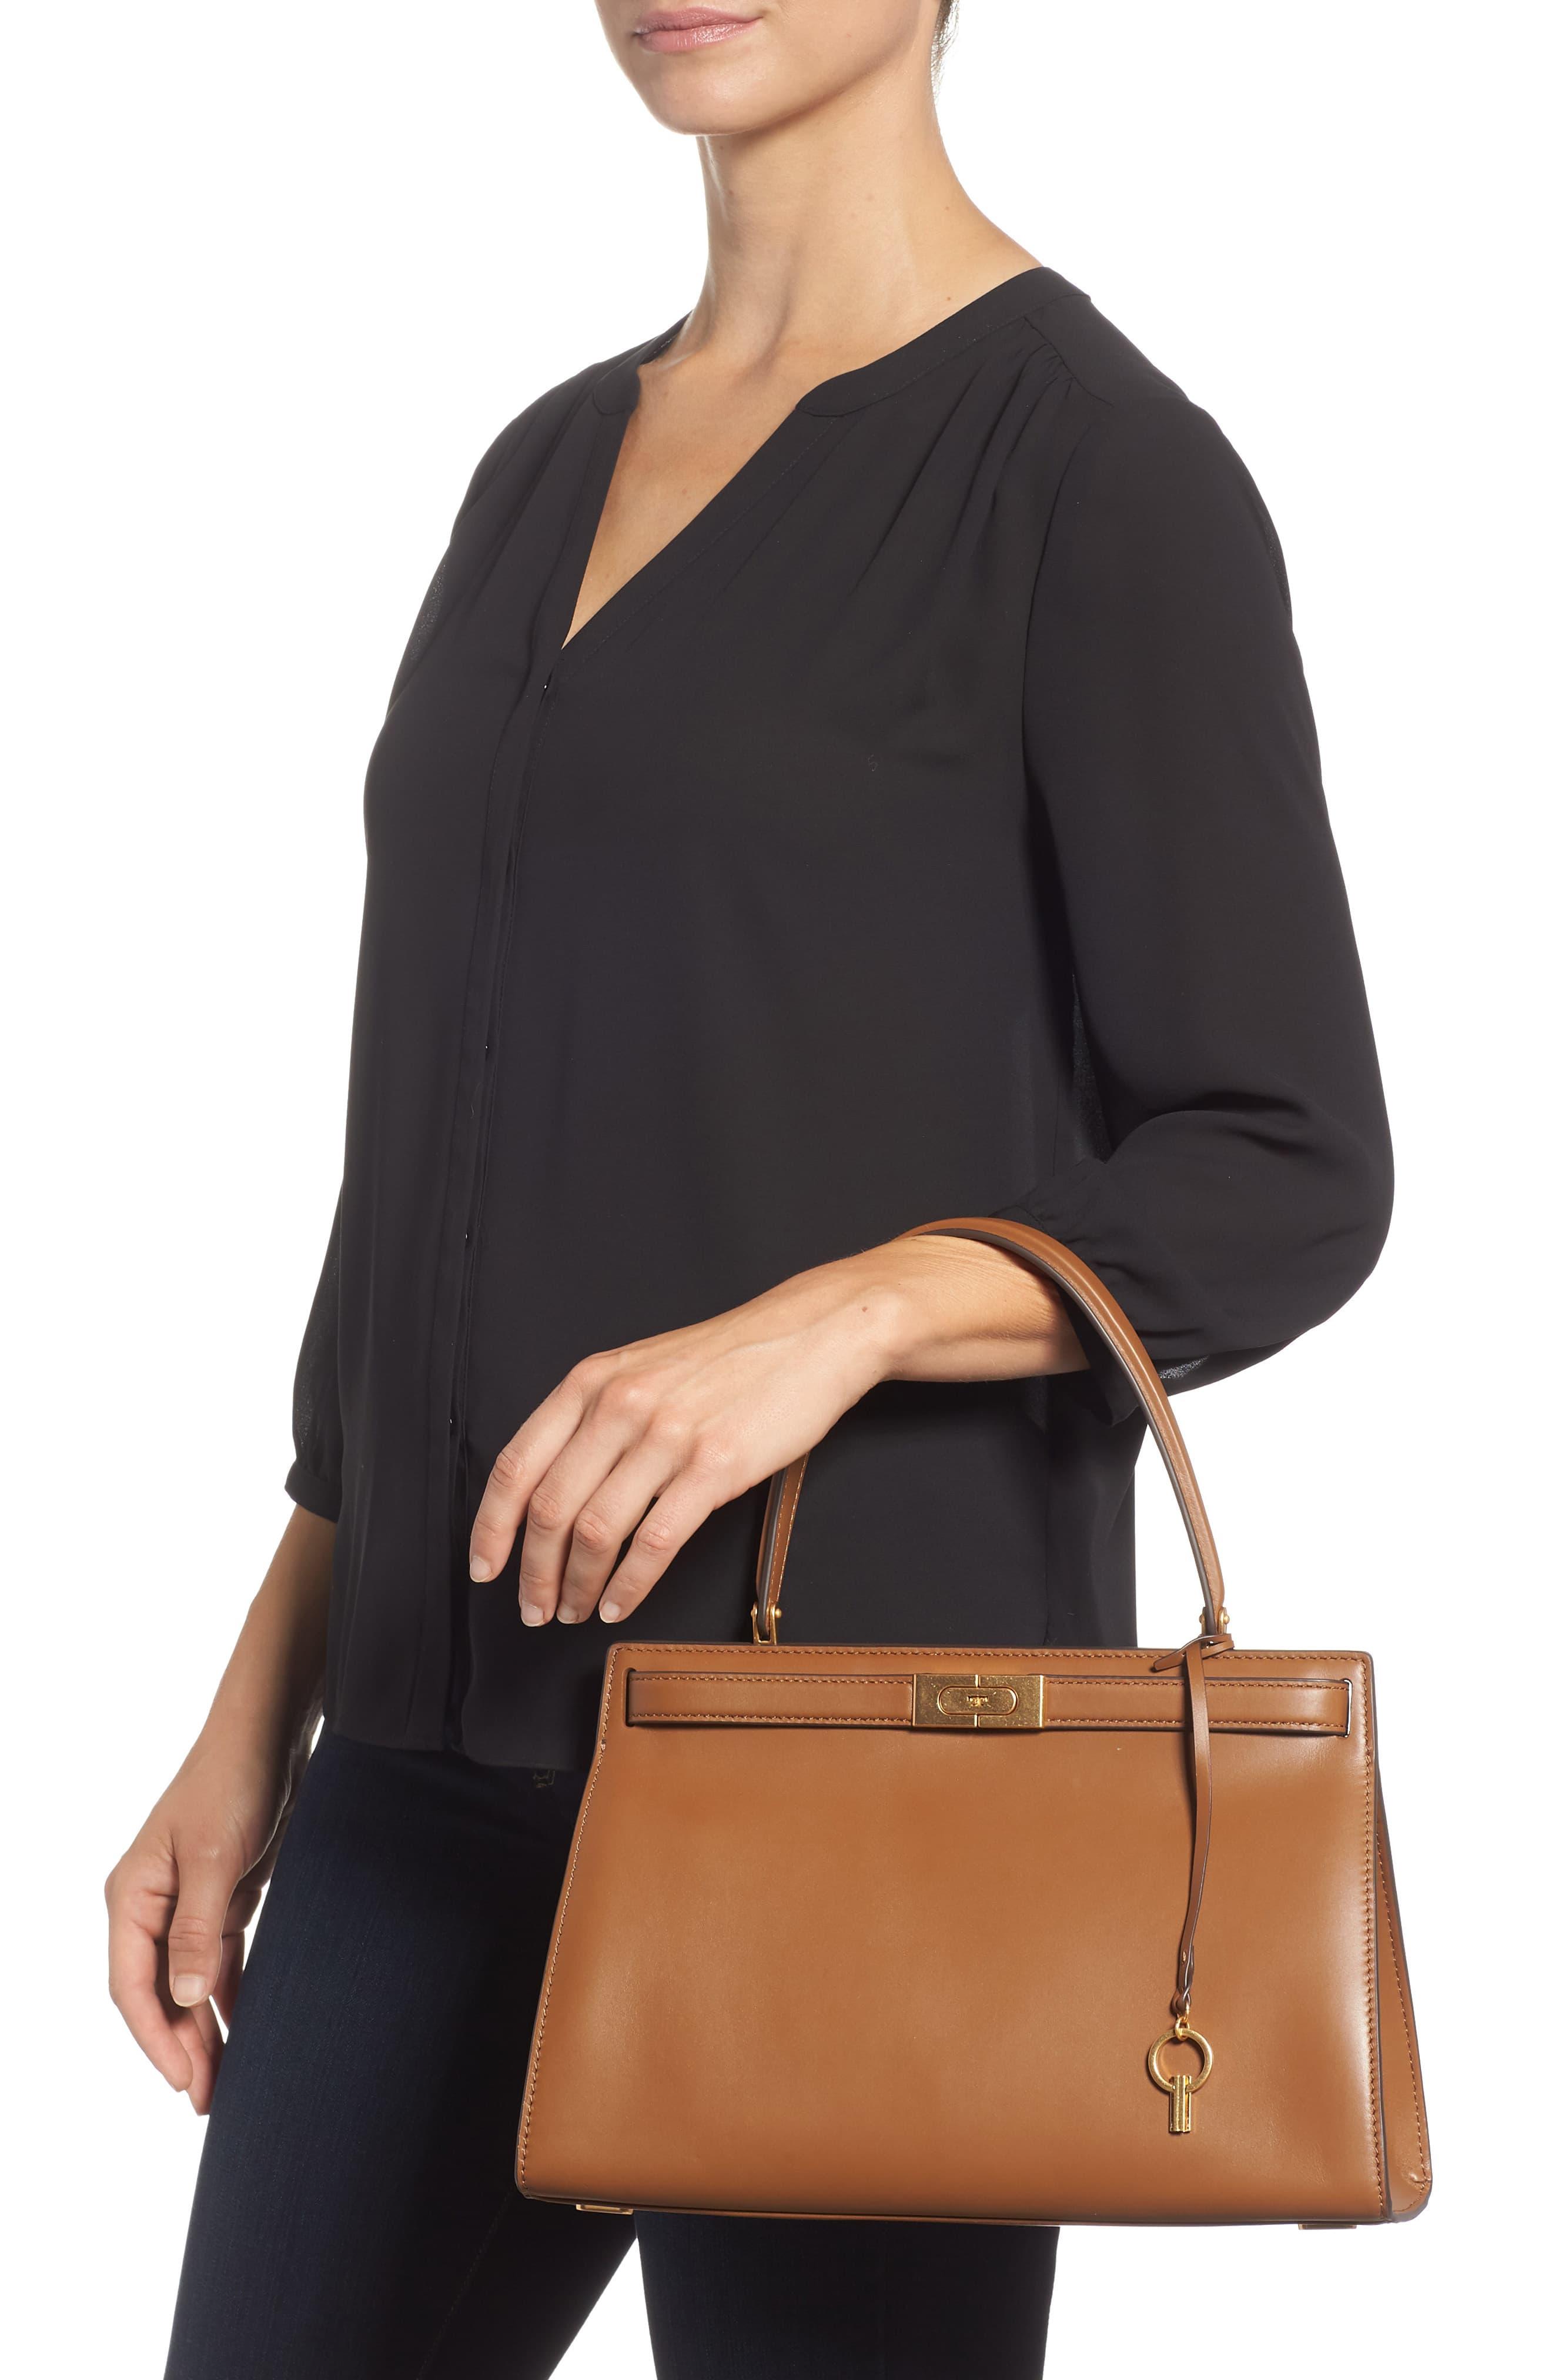 Tory Burch Lee Radziwill Leather Bag in Brown - Lyst